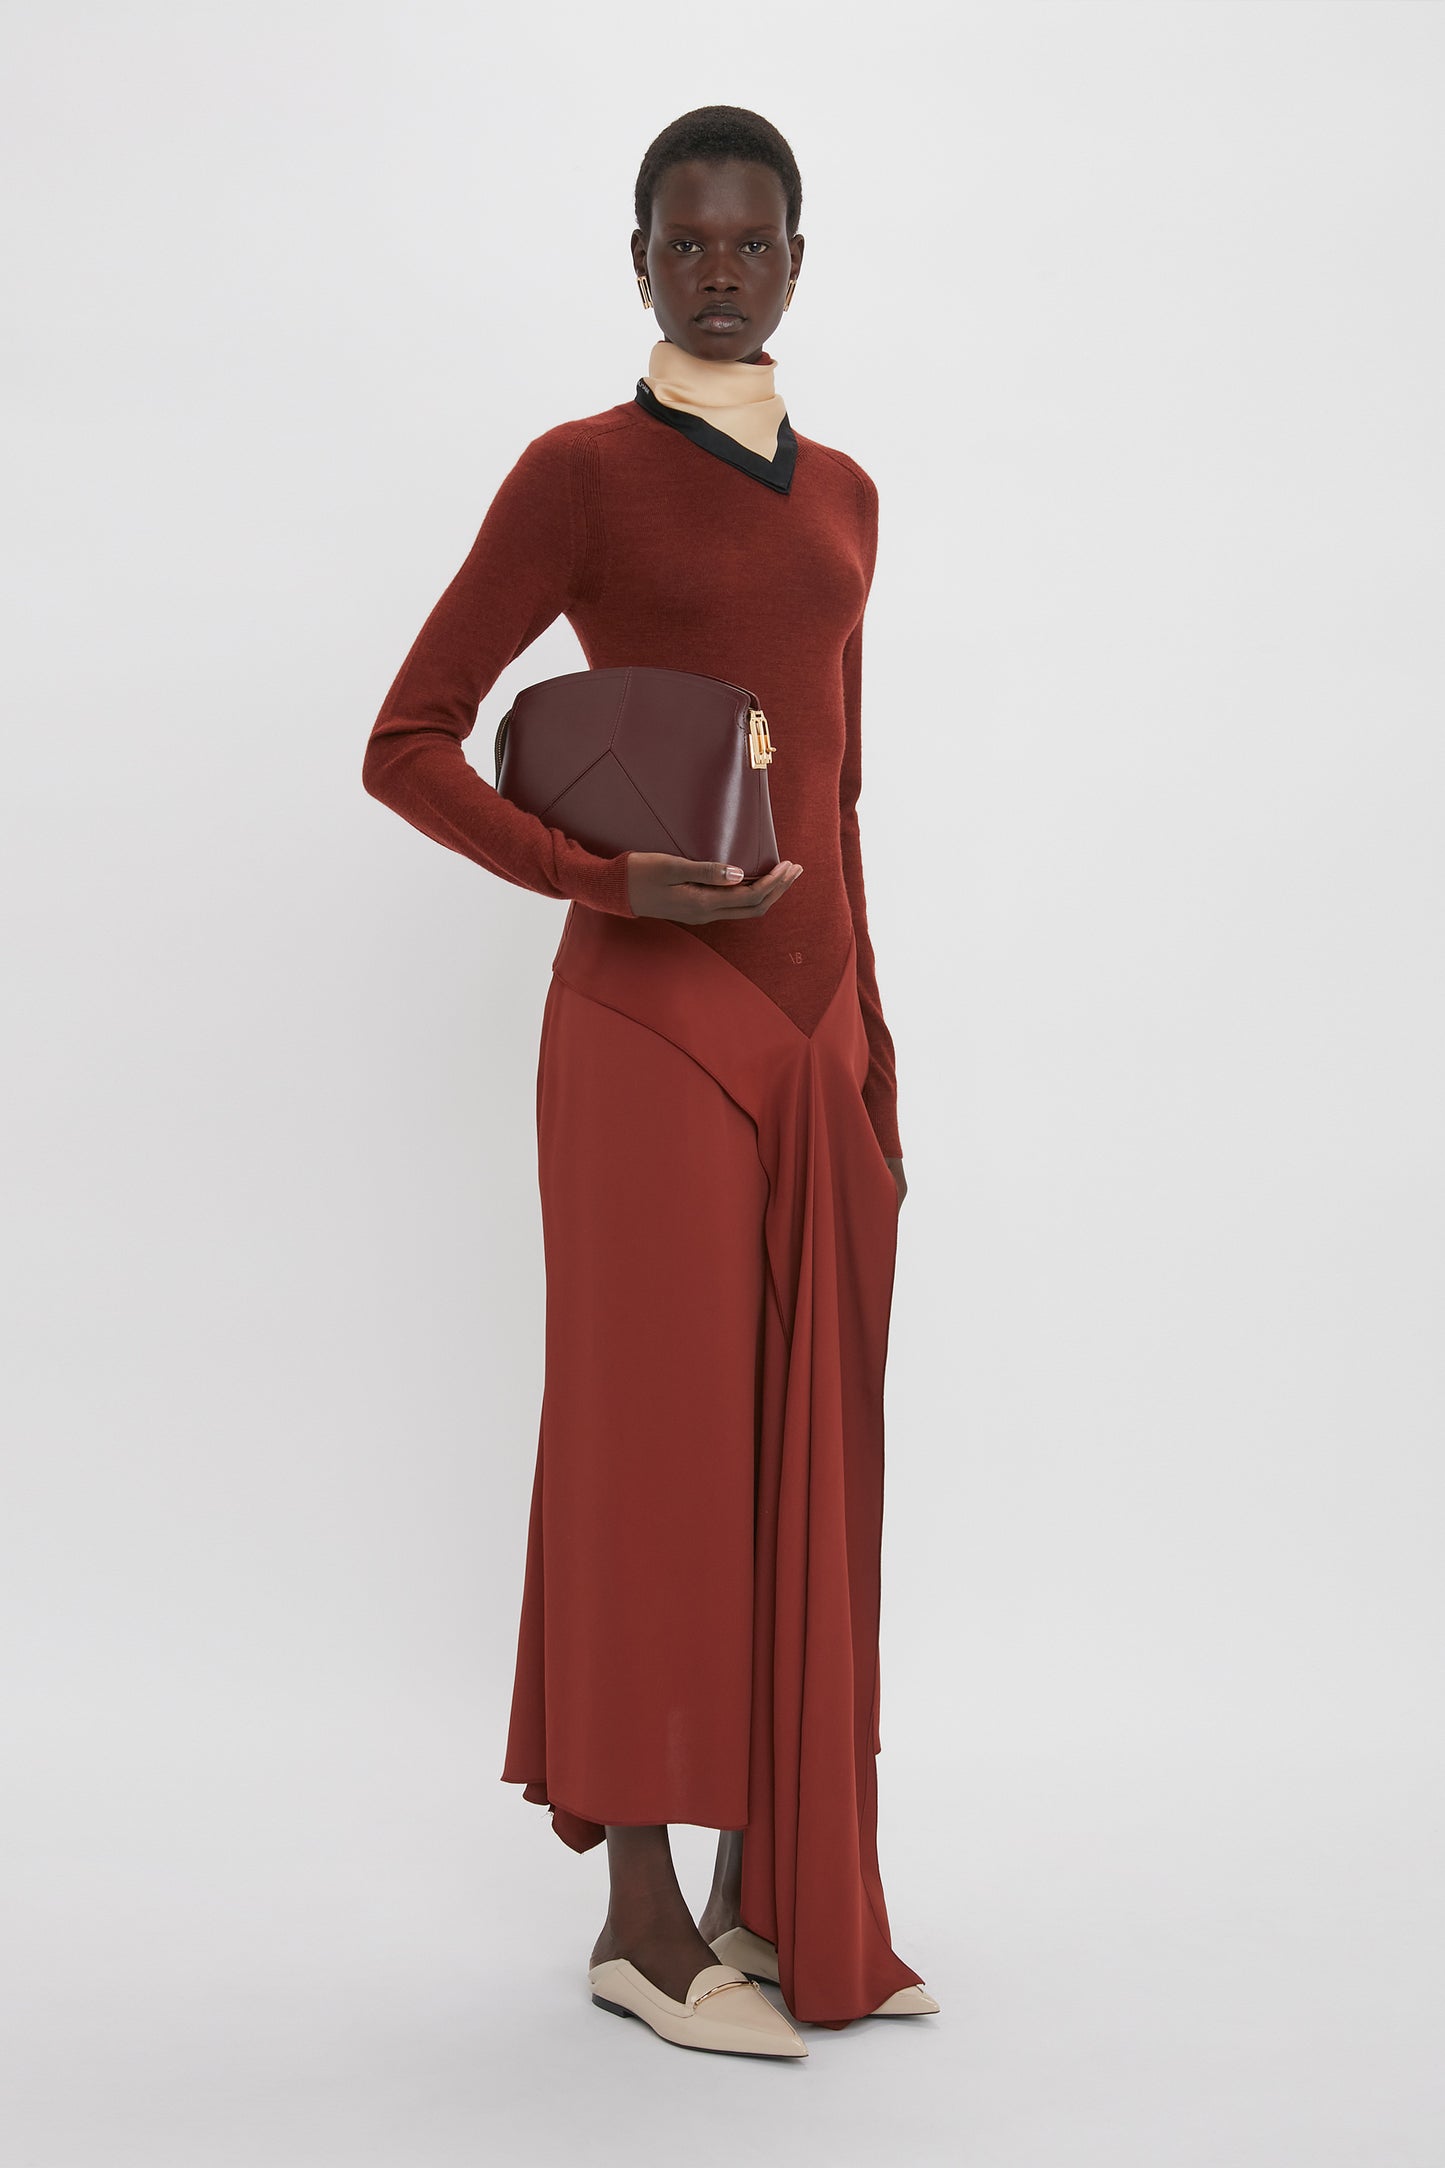 A person stands against a white background wearing the Victoria Beckham High Neck Tie Detail Dress In Russet with a merino wool bodice, long red skirt with an asymmetric hemline, and white shoes, holding a red geometric clutch.